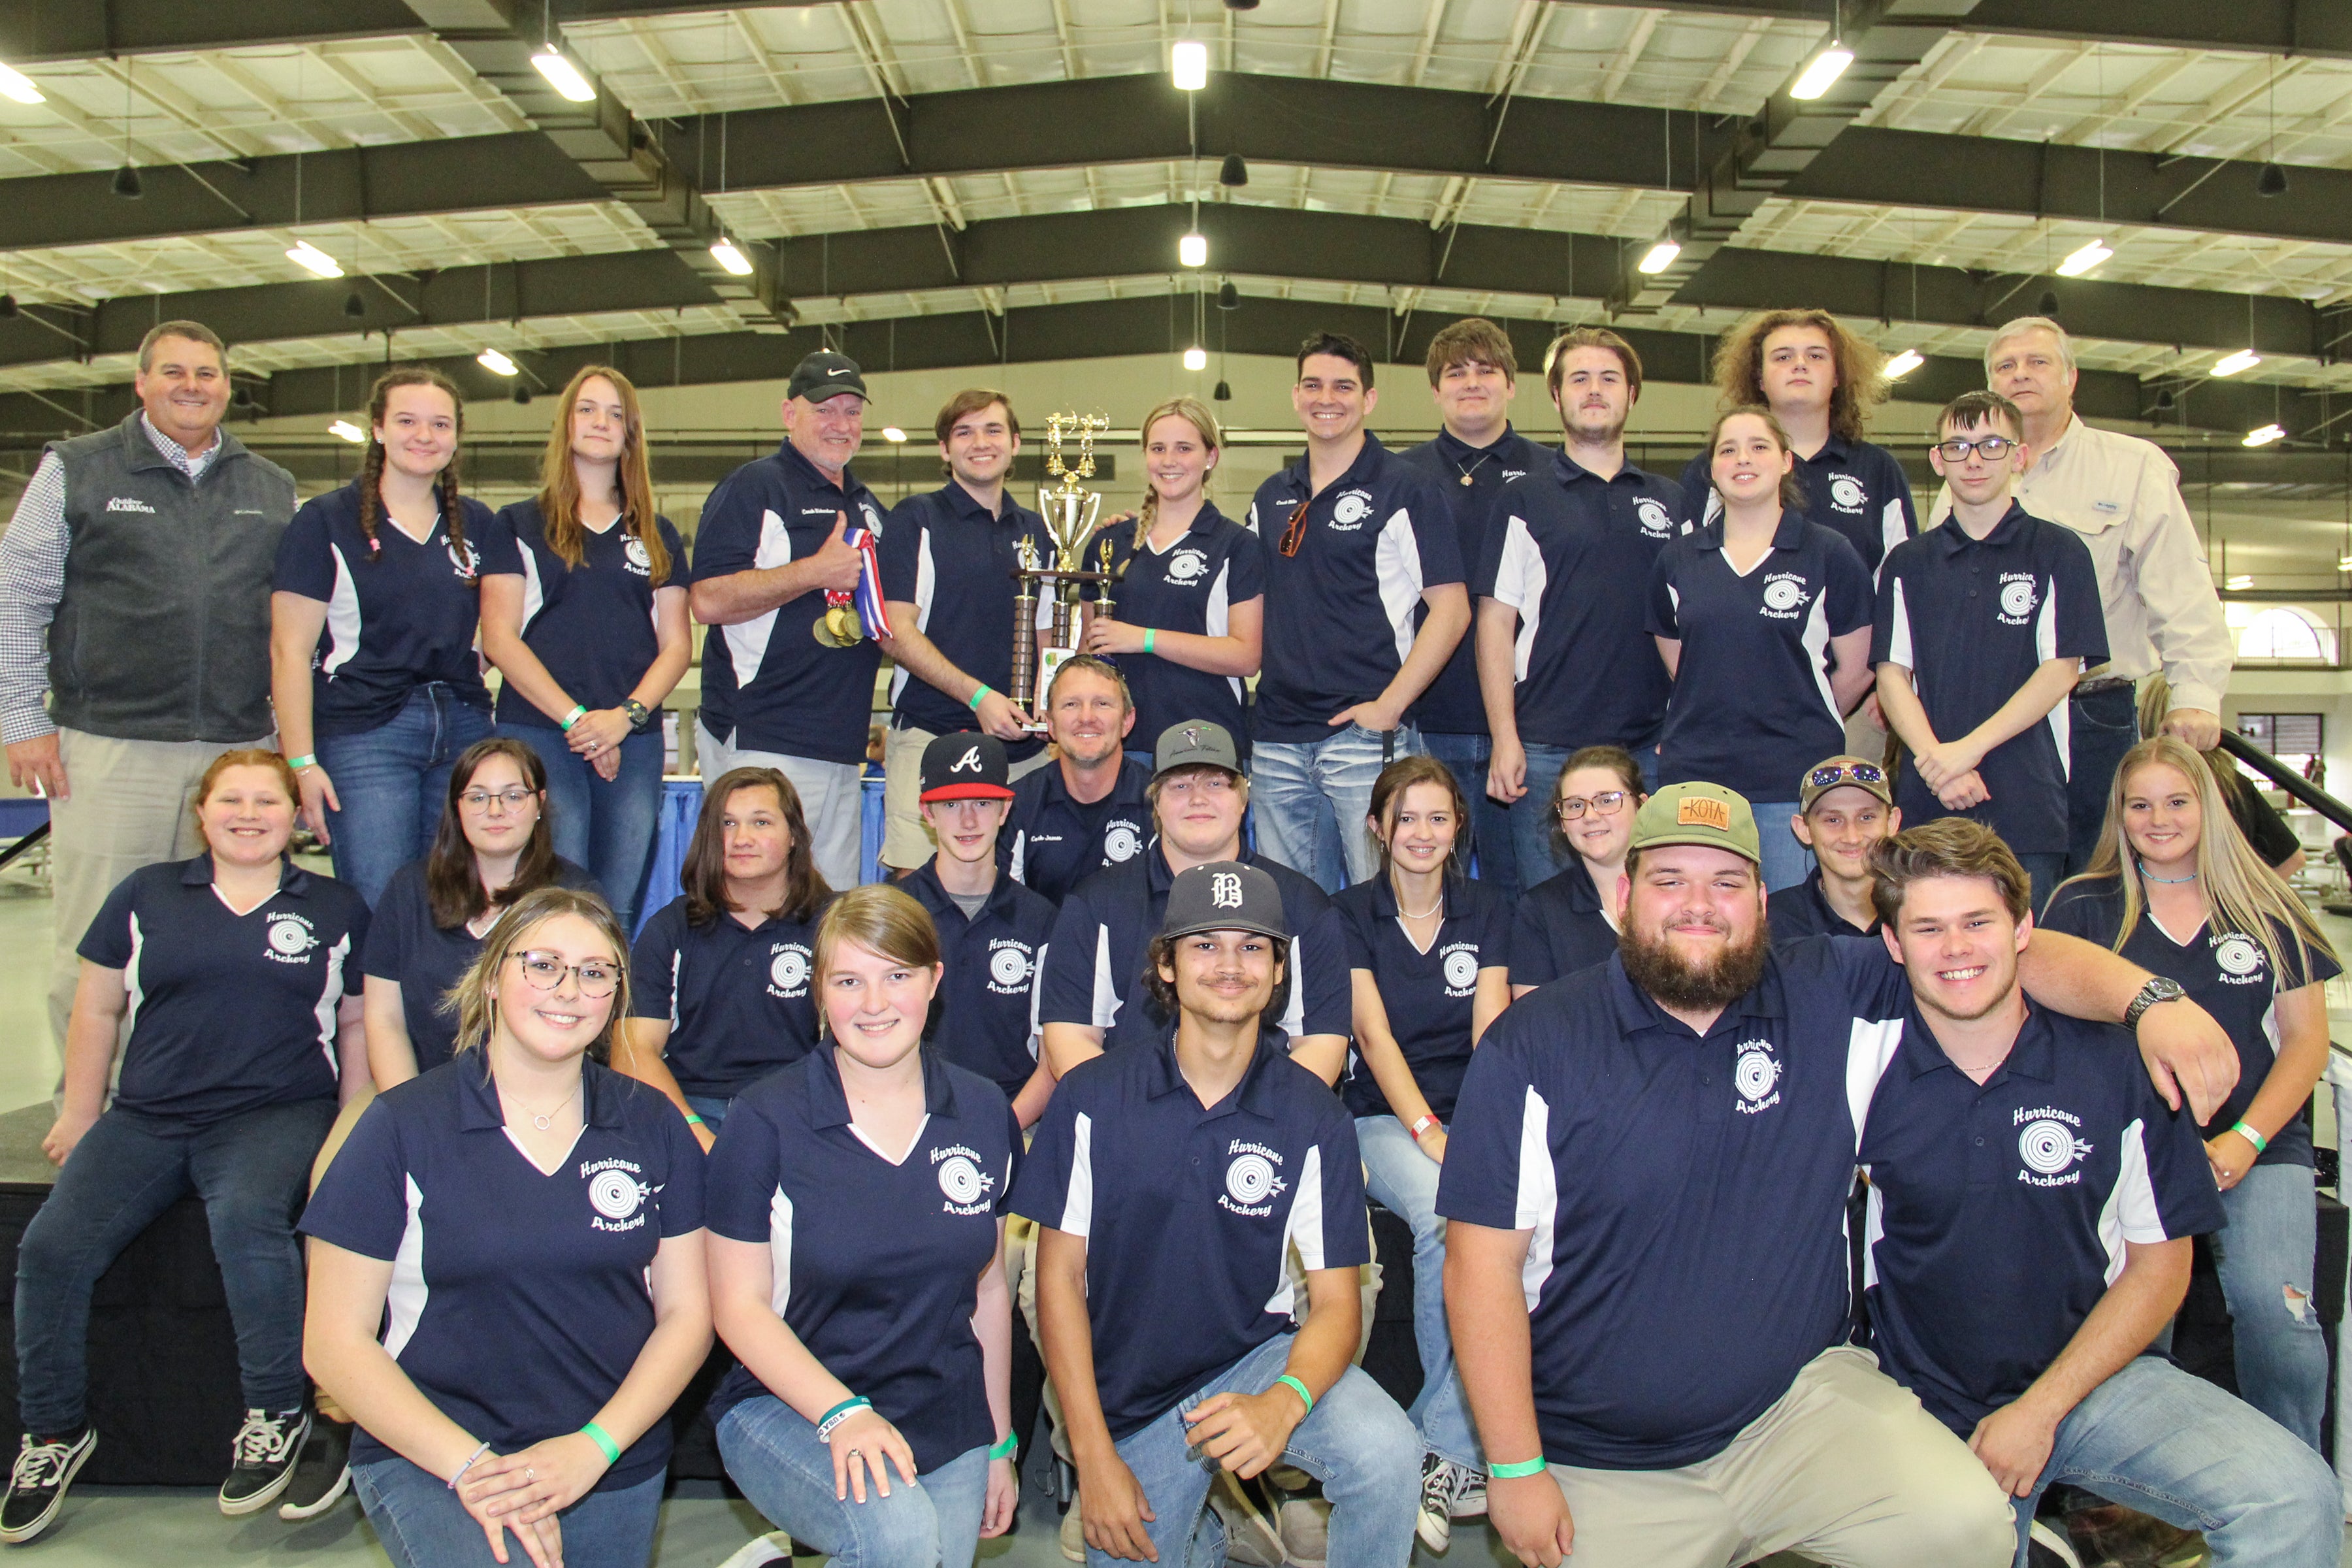 ADCNR Commissioner Chris Blankenship (left) and National Wild Turkey Federation State Chapter President Craig Scruggs (back row, right) with the Alma Bryant Hurricanes Archery Team who took first place in the high school division of the 2022 NASP Alabama State Championship.